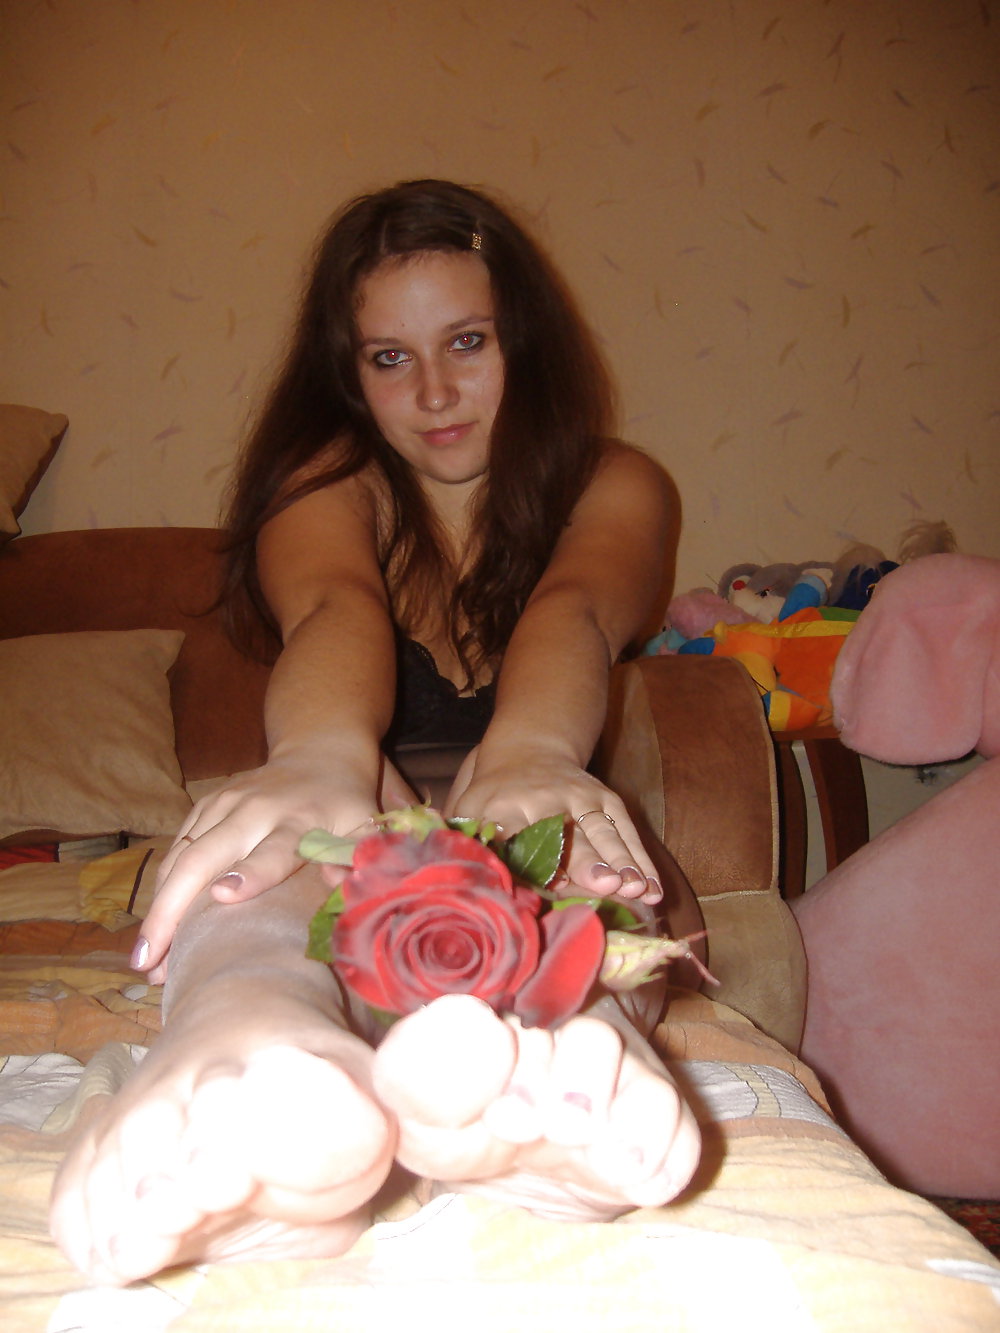 Brunette teen posing with a rose #11860881